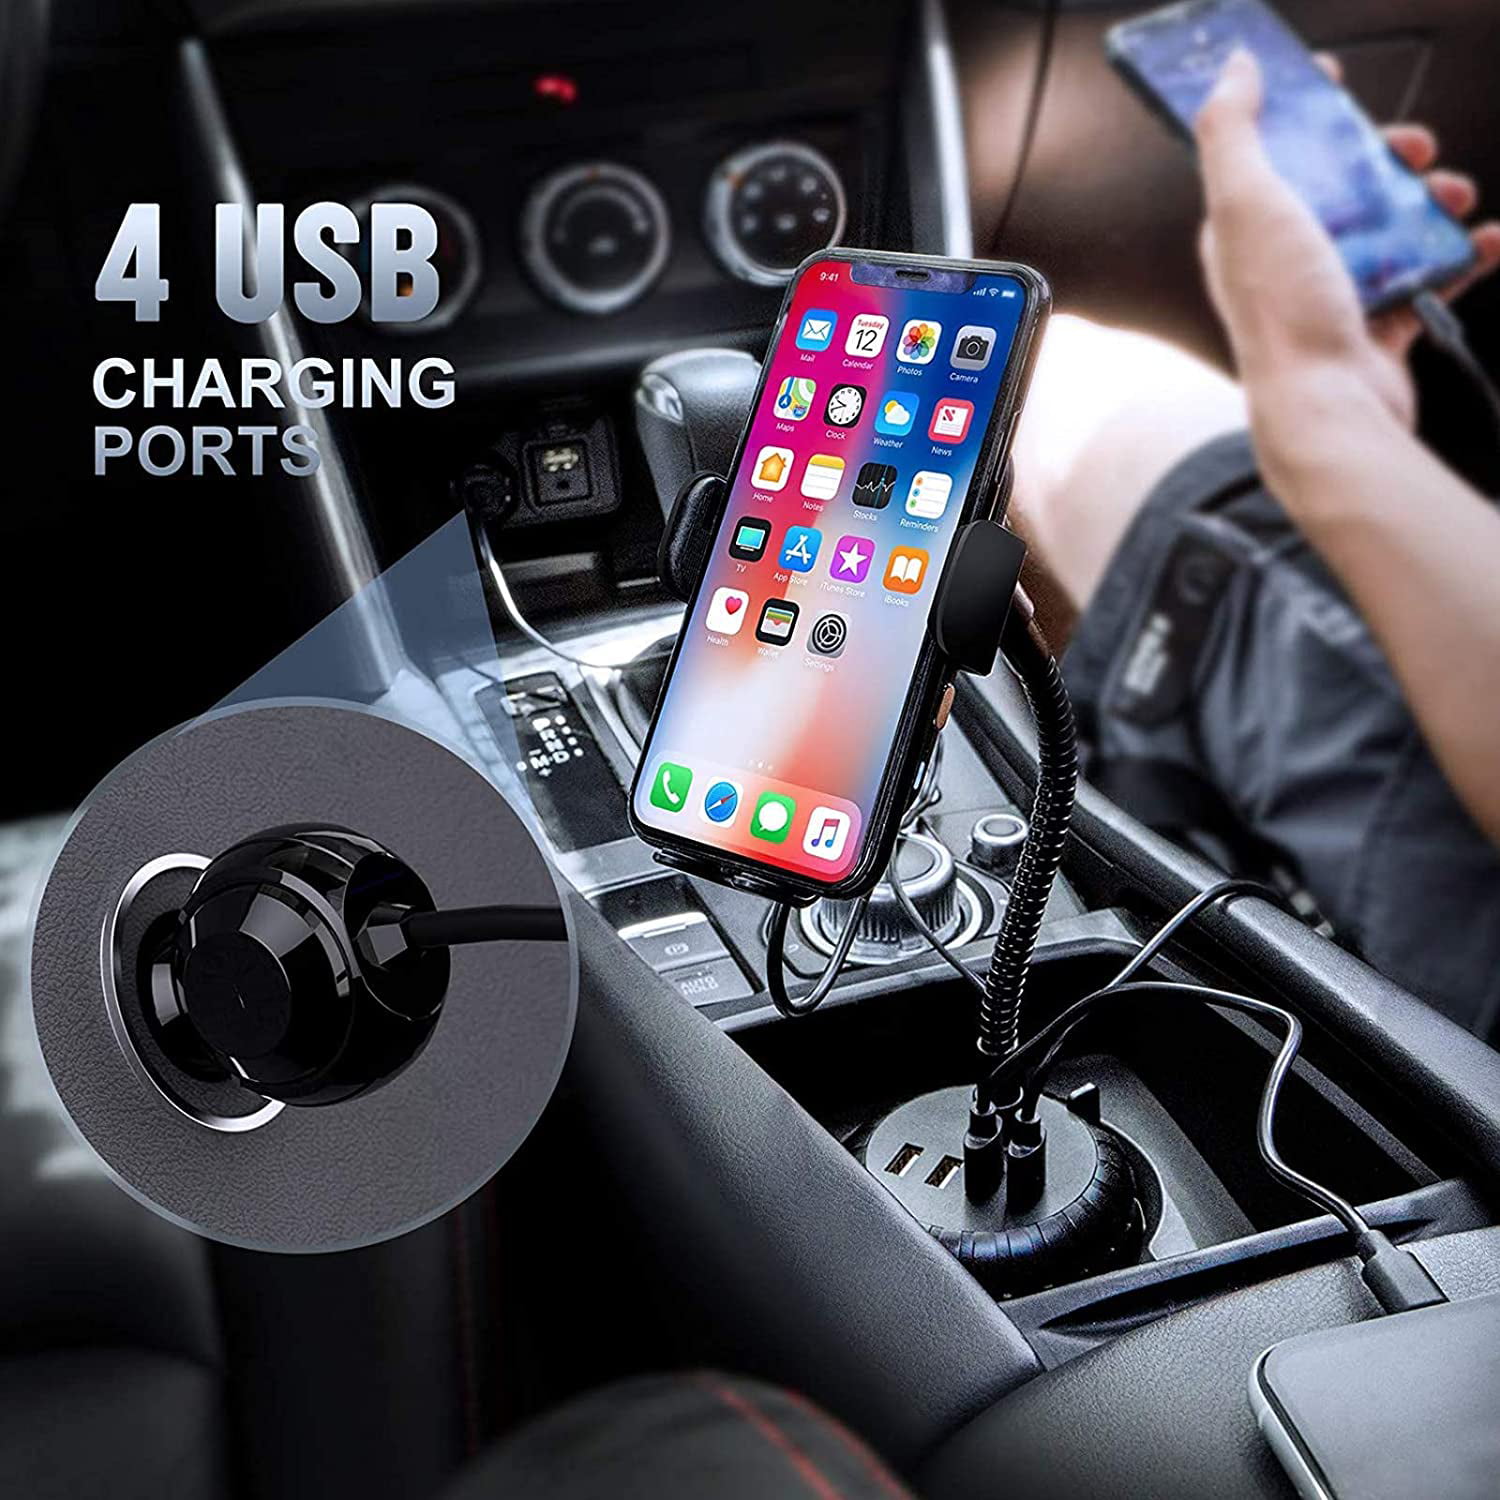 Qi Wireless Car Charger Car Cup Holder Mount USB Car Charger For Samsung S7  IPhone7 Nexus5 Xiaomi From Meree, $49.4 - DHgate.Com